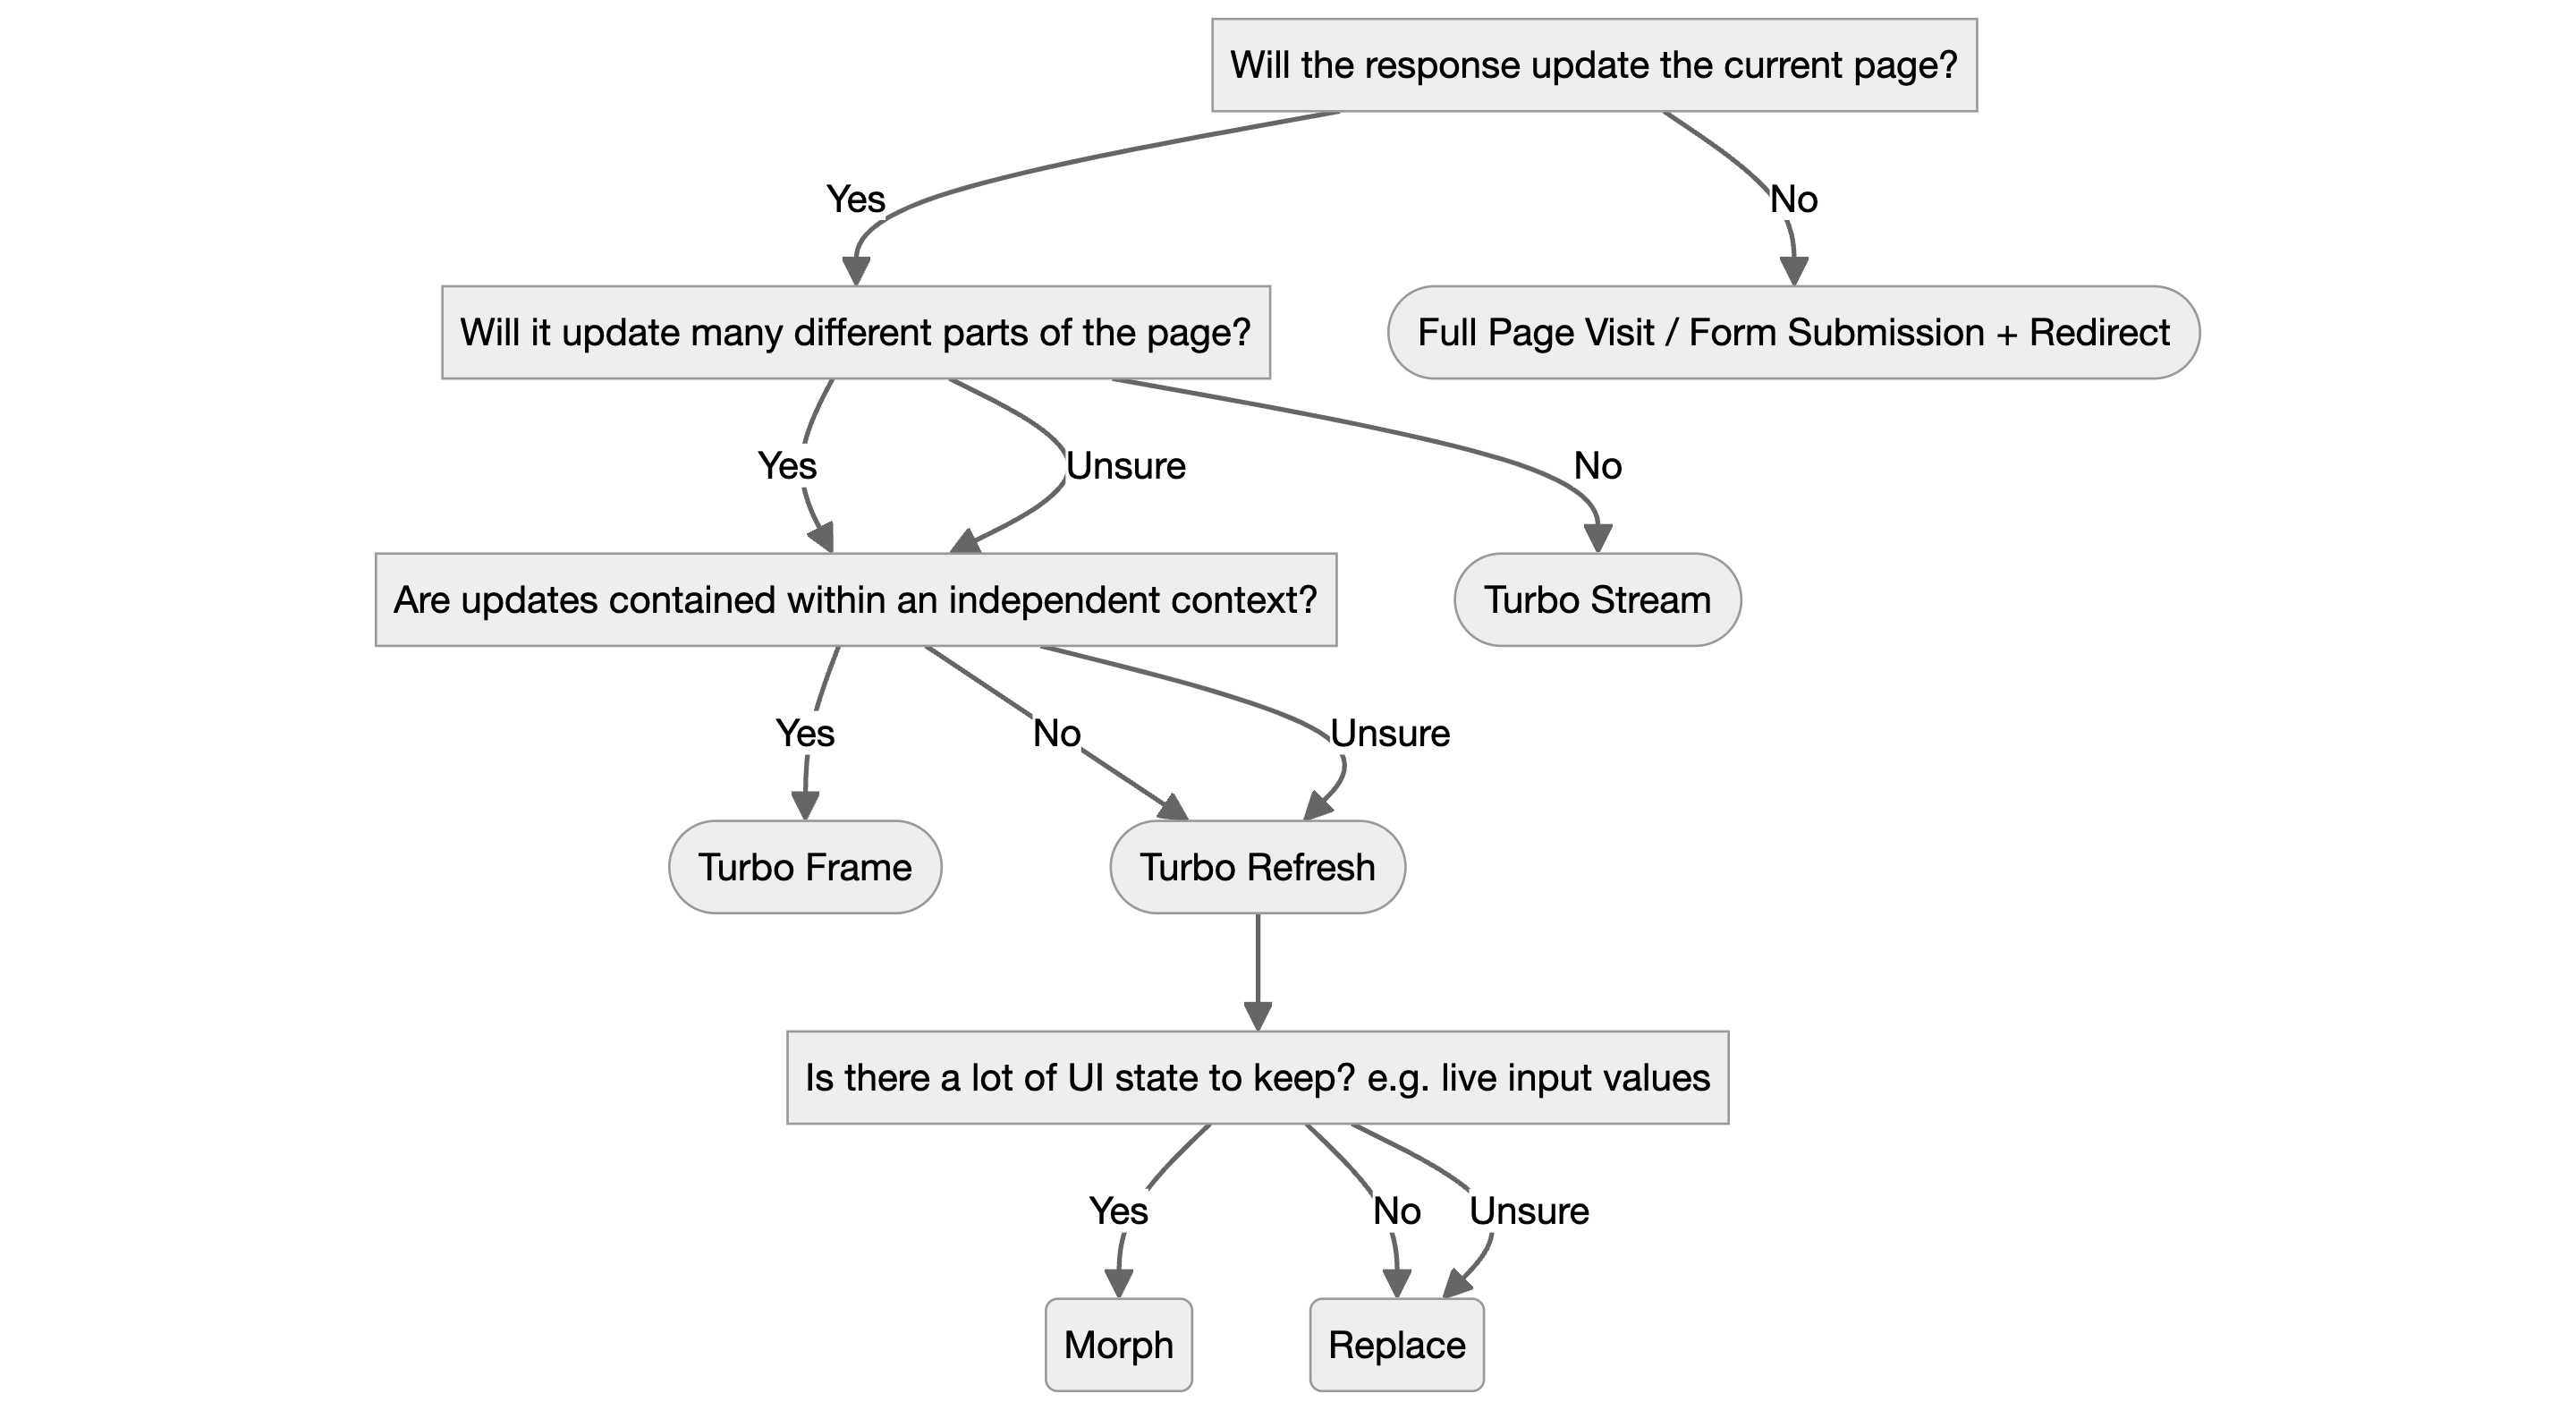 A flow diagram containing the considerations for when to use each Turbo feature. To summarise: if the page response only makes a small number of changes, use Turbo Streams; otherwise, if the response updates a distinct area of the page, use Turbo Frames; otherwise, use a Turbo Refresh. If the update requires that lots of UI state is to be kept (e.g. live input values), use a Morph refresh, otherwise a plain Replace Refresh will do.